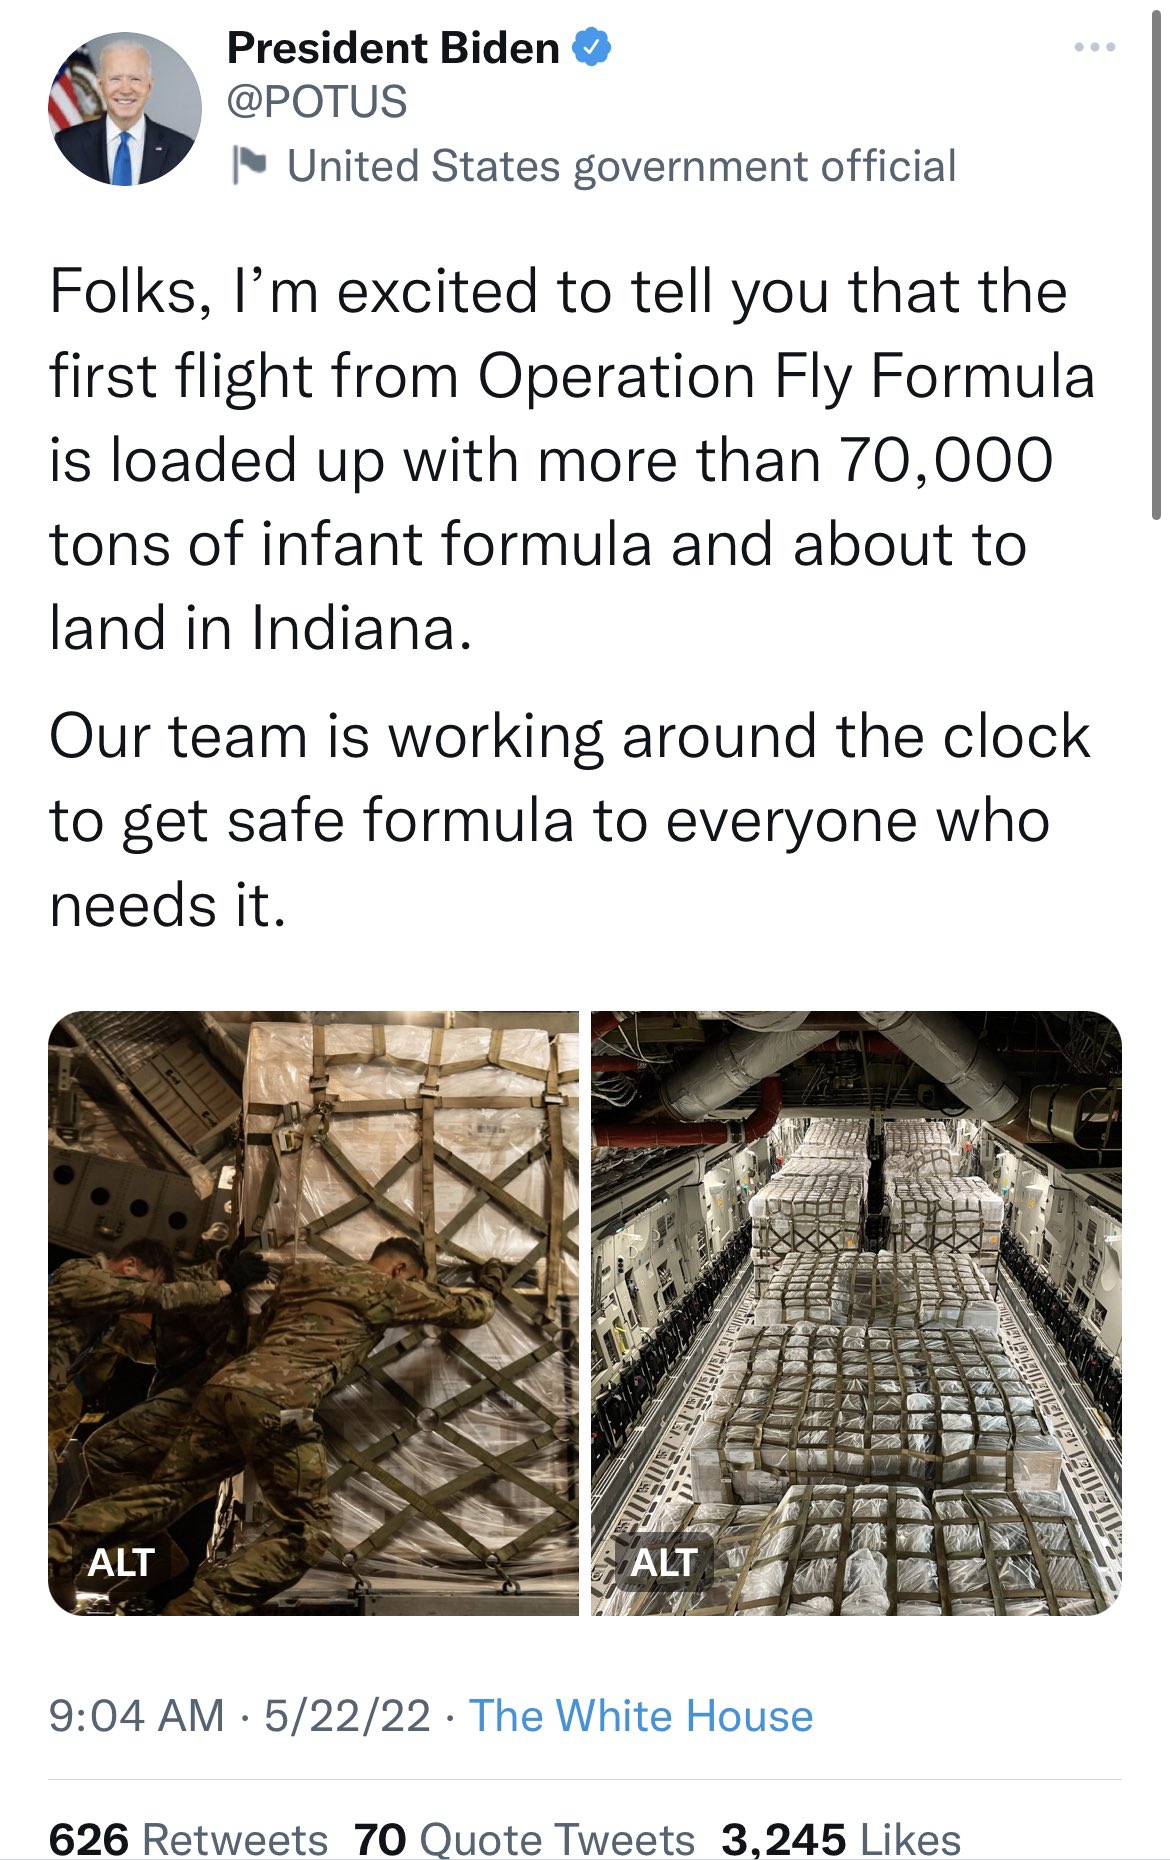 Parasit Postkort Marvel Steve Krakauer on Twitter: "Official @POTUS account tweets the U.S. is  receiving 70,000 tons of baby formula. Actually it's 70,000 pounds, so less  than 40 tons. Now deleted. Not before it was